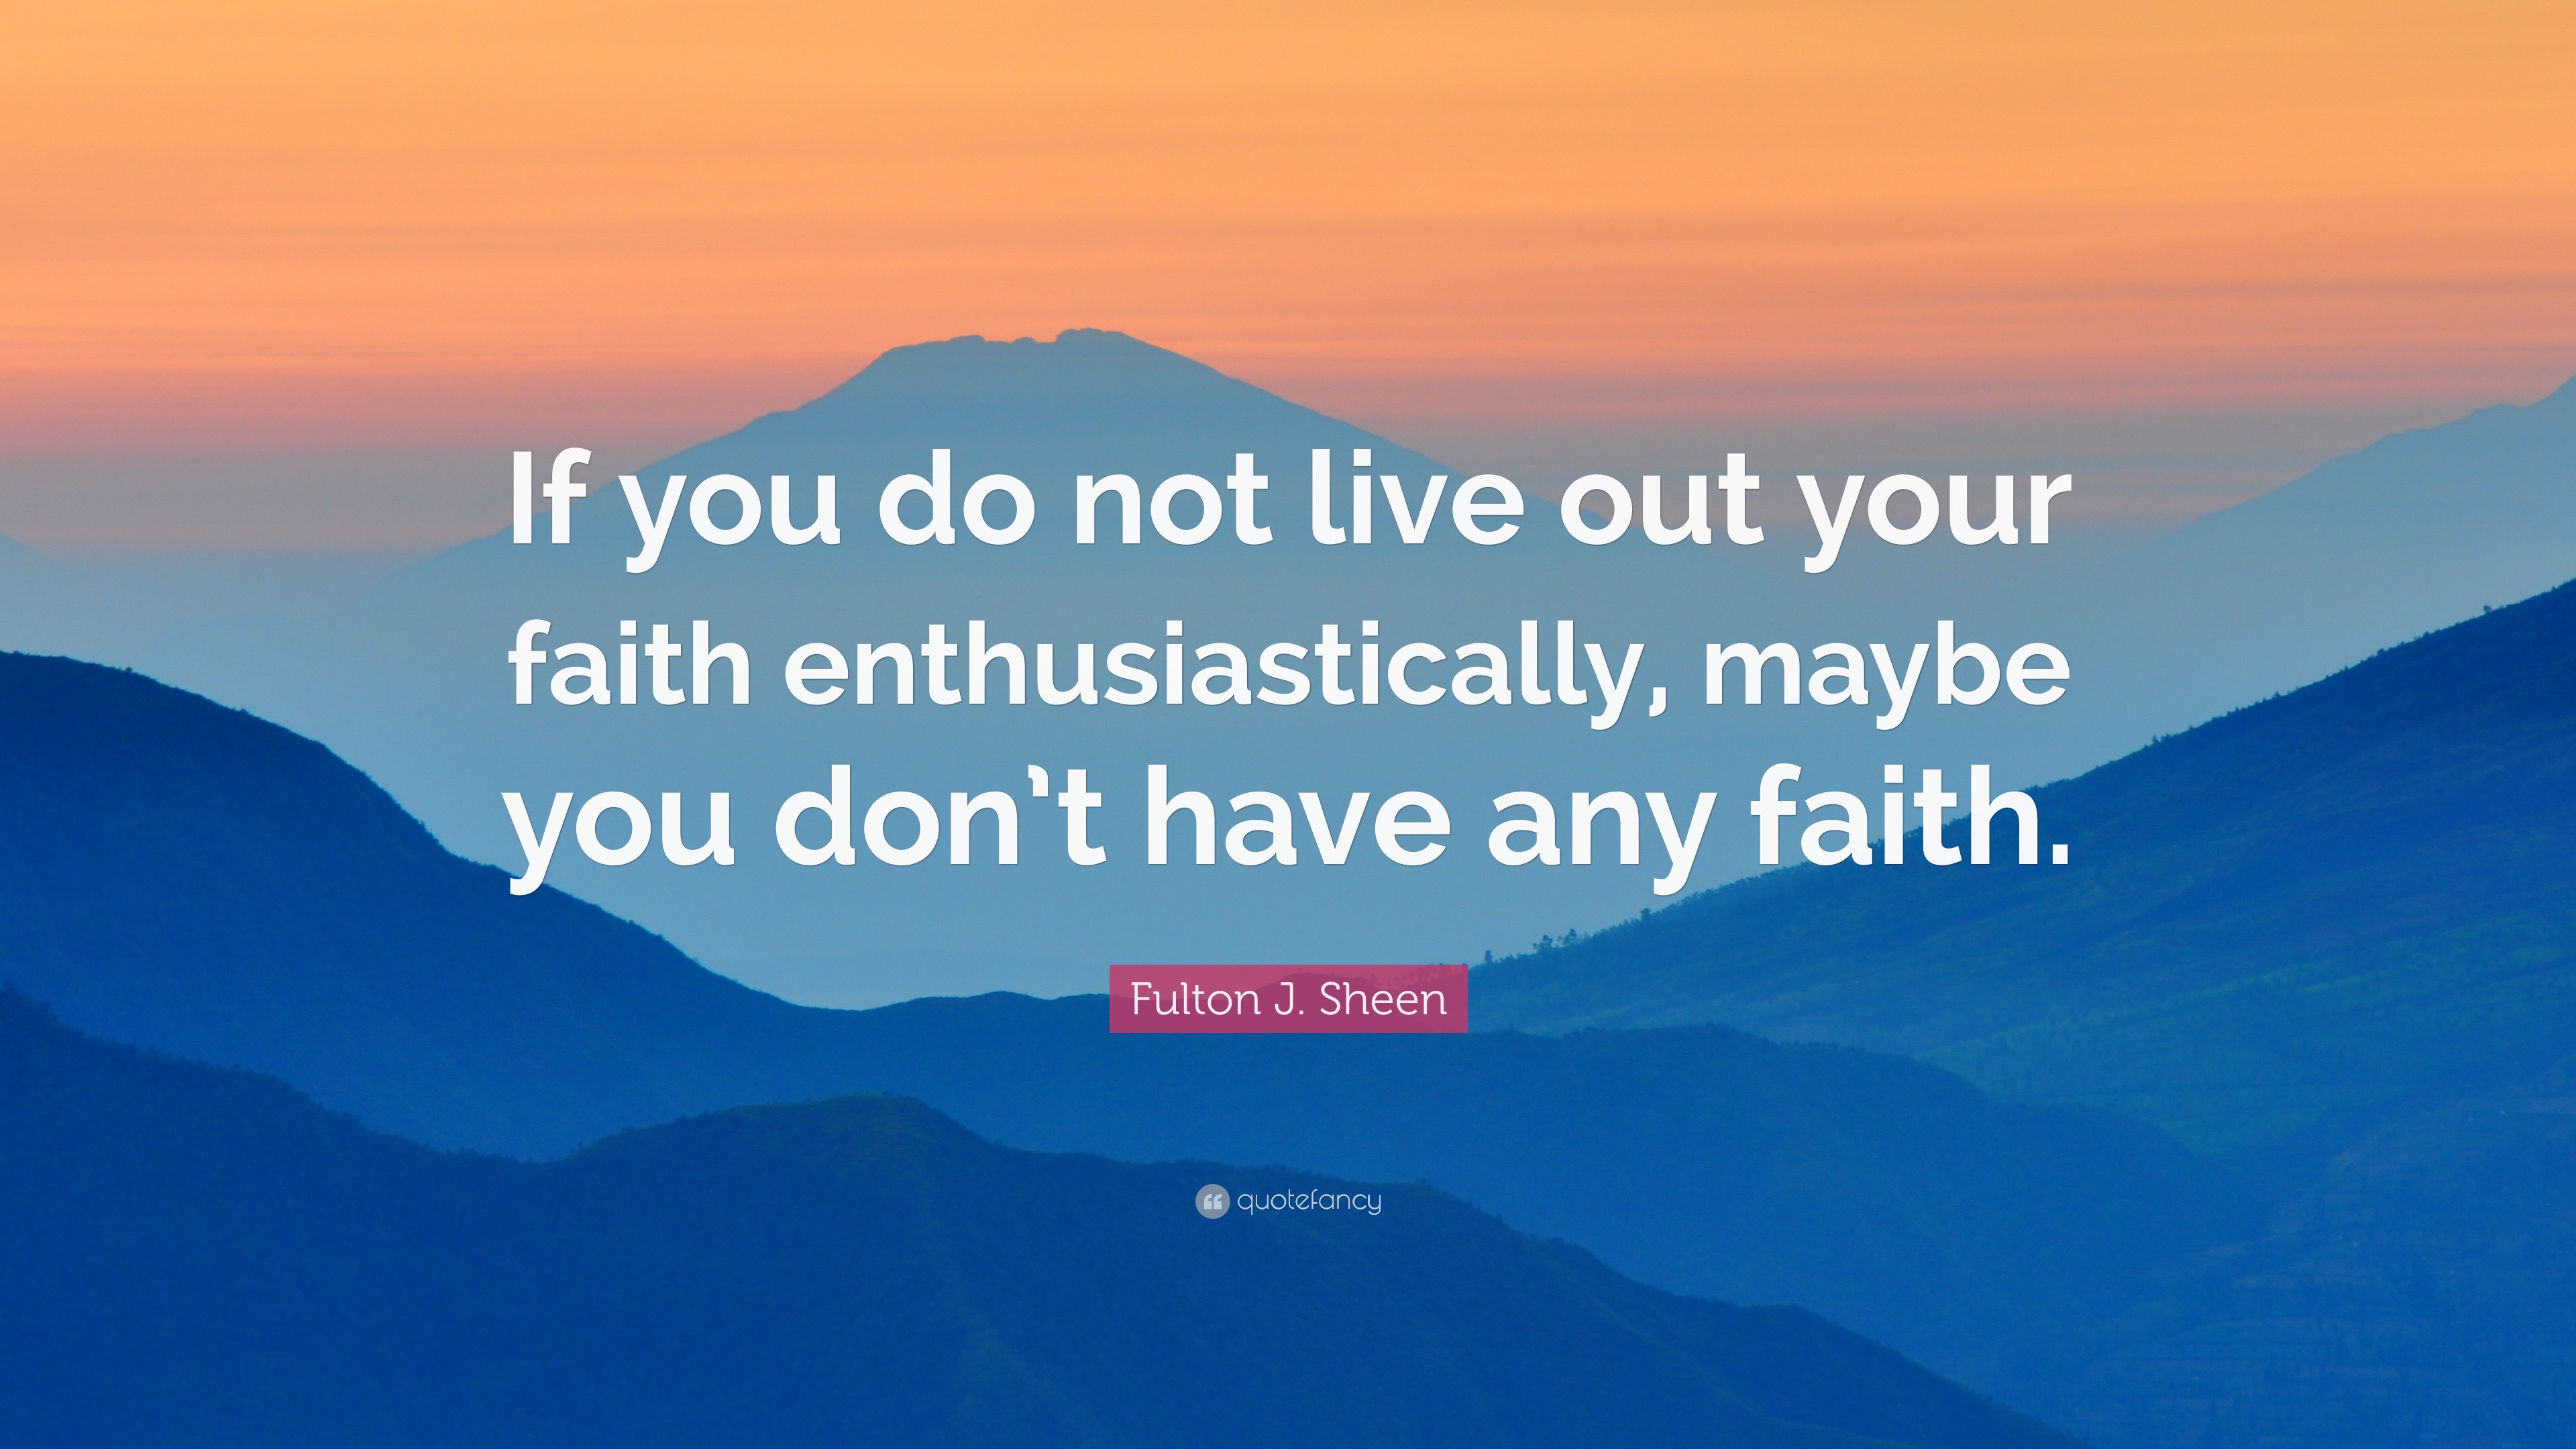 Fulton J. Sheen Quote: “If you do not live out your faith